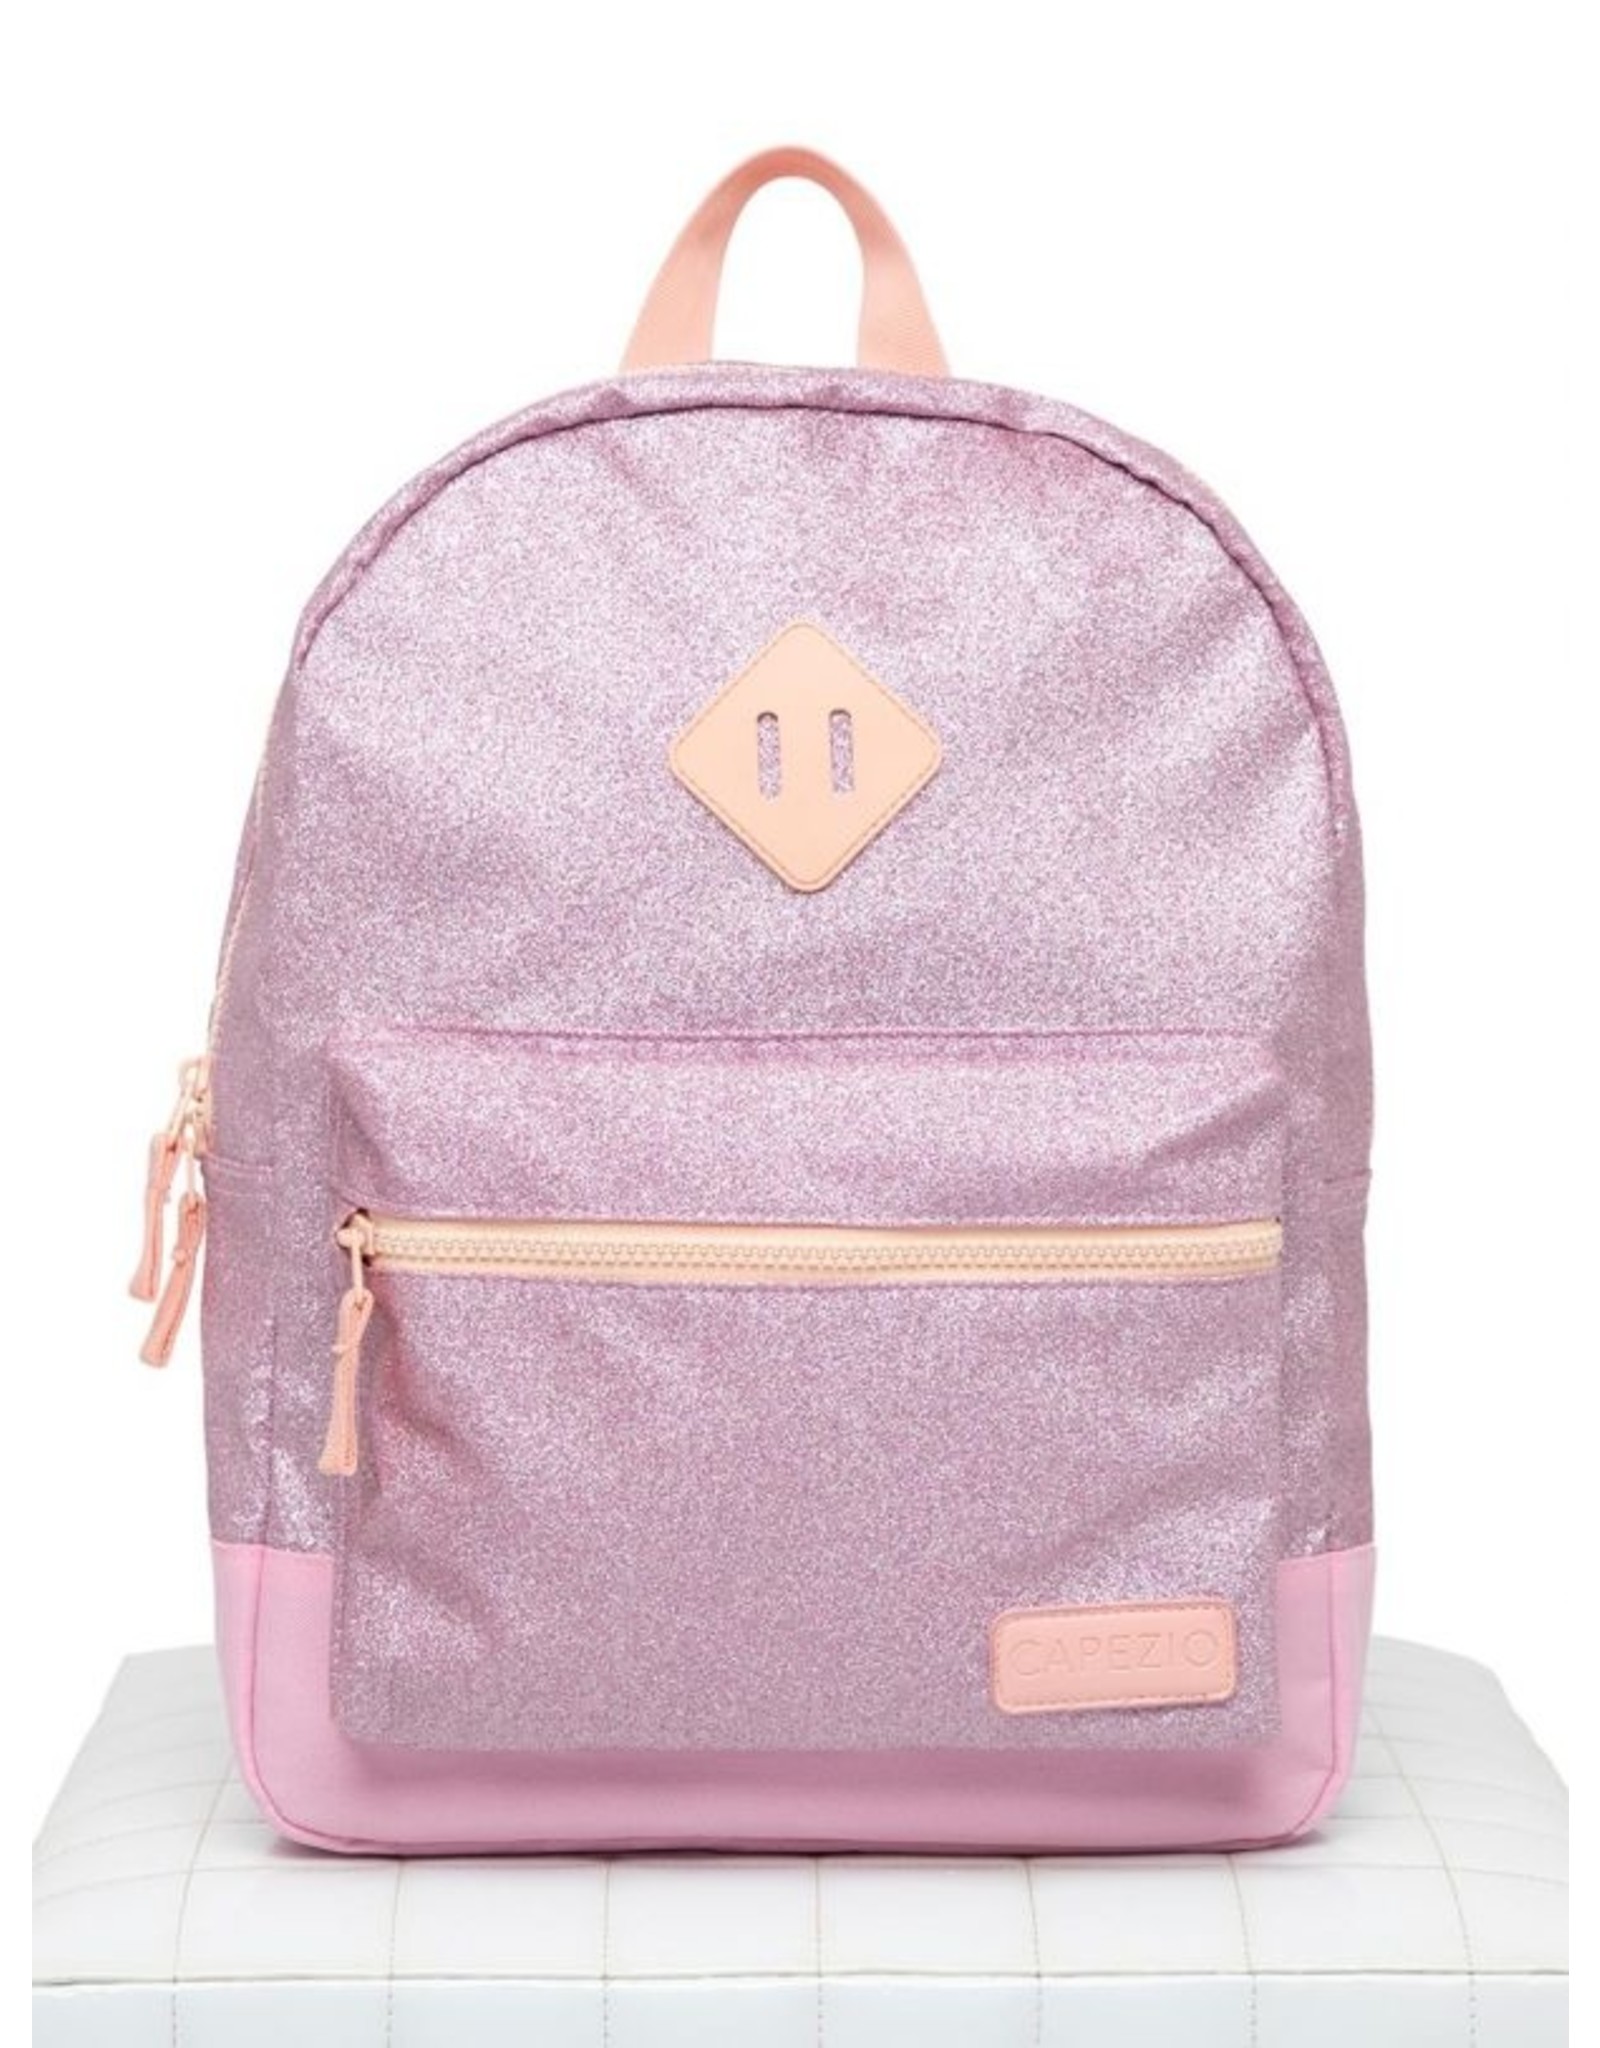 CAPEZIO SHIMMER BACKPACK